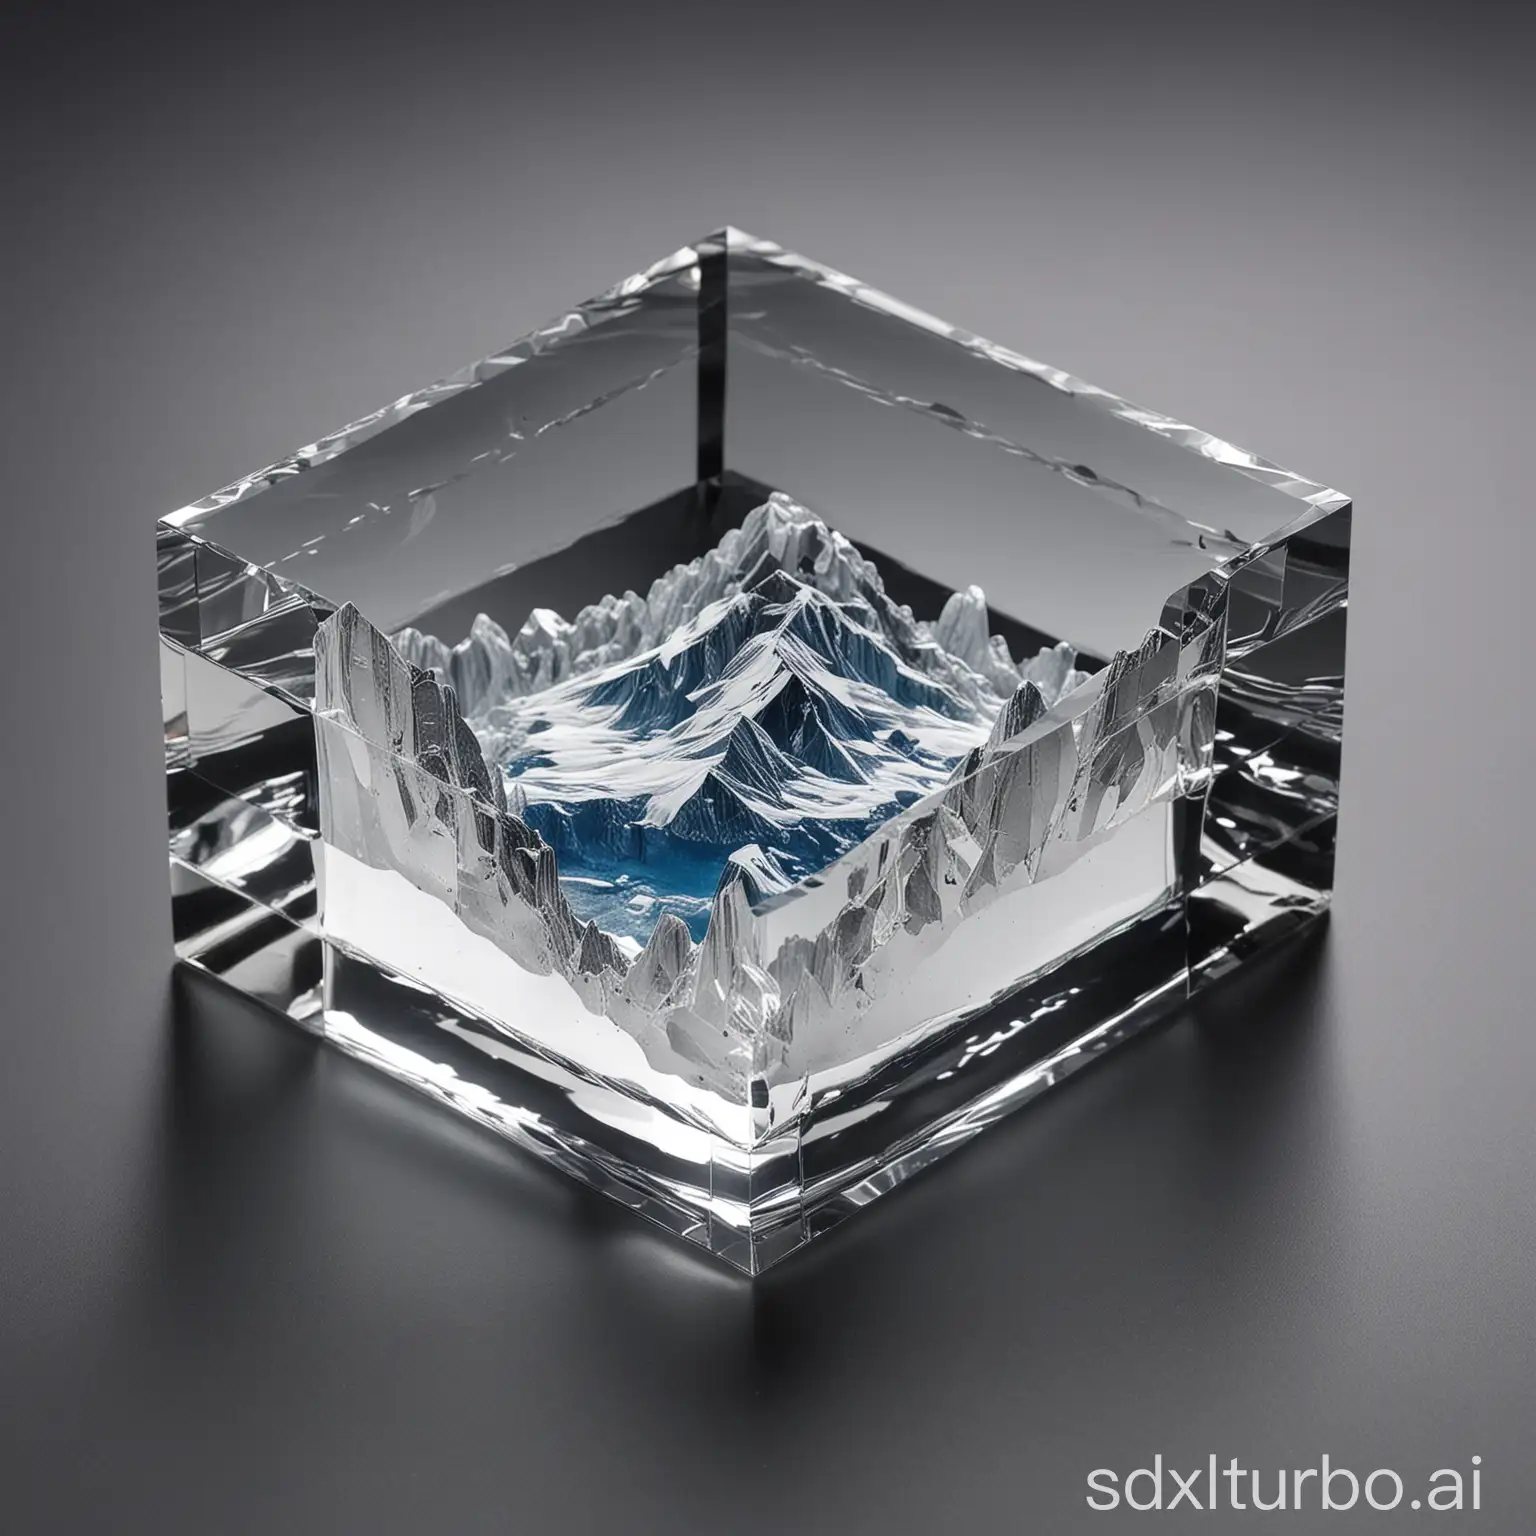 Crystal-Clear-Mountain-in-Chamfered-Box-Tranquil-Natural-Beauty-in-Crystal-Sculpture